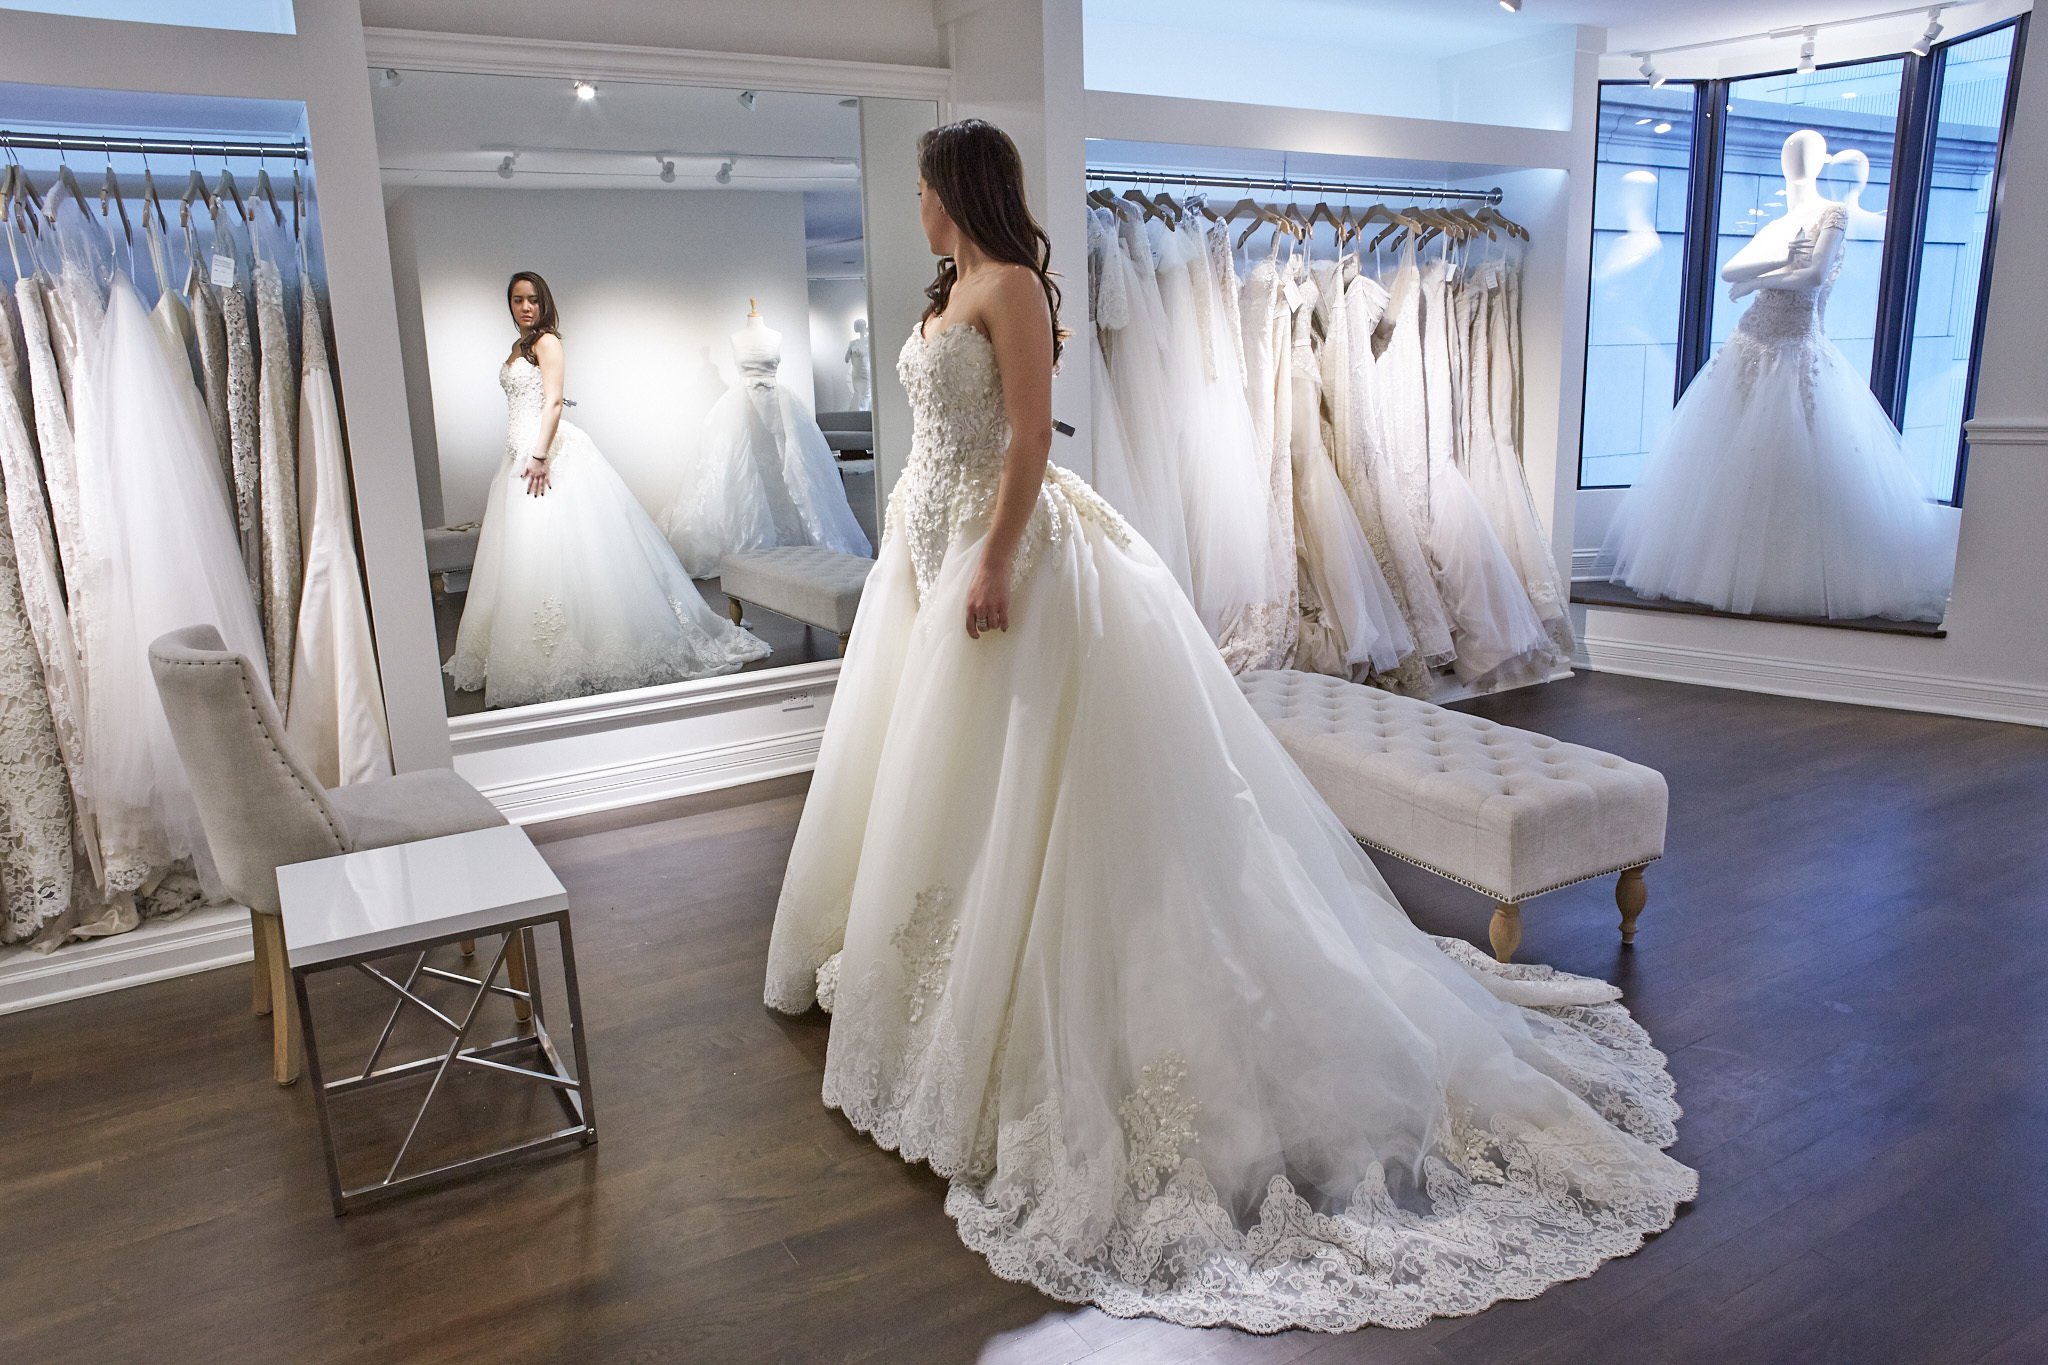 The best bridal shops in Chicago for the perfect wedding dress